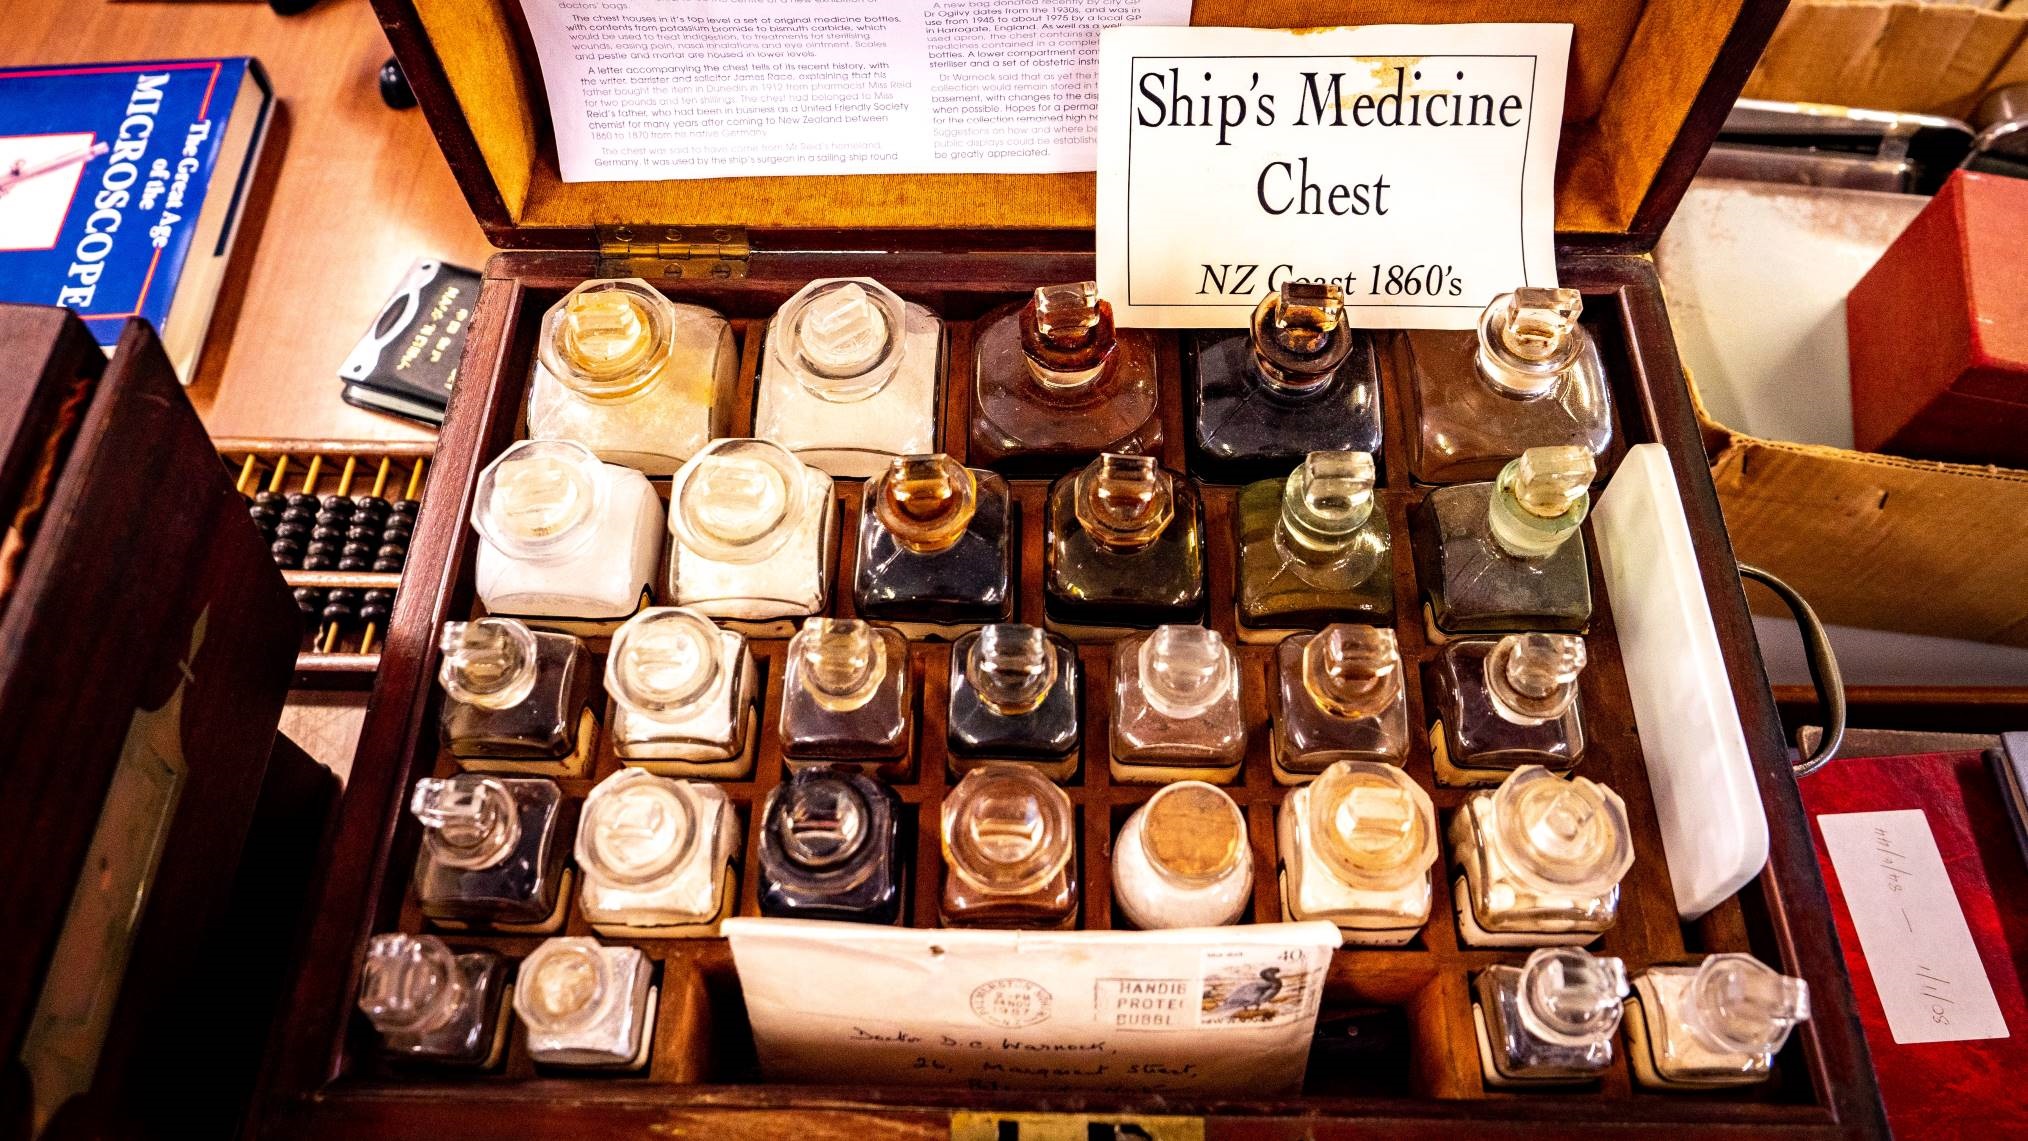 A wooden medicine chest complete with medicine bottles, recovered from a shipwreck on the New Zealand coast in the 1860s.